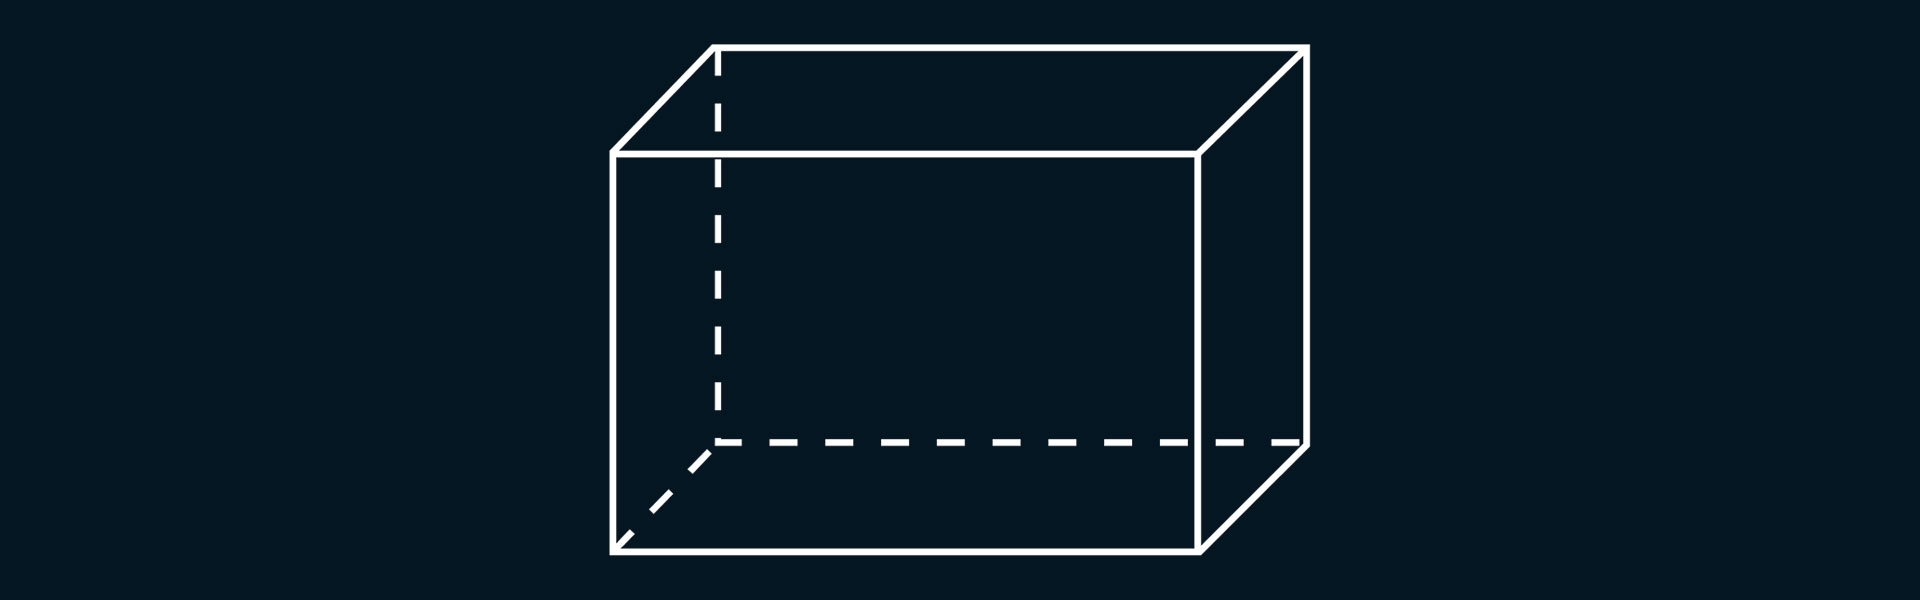 Rectangular Parallelepiped
